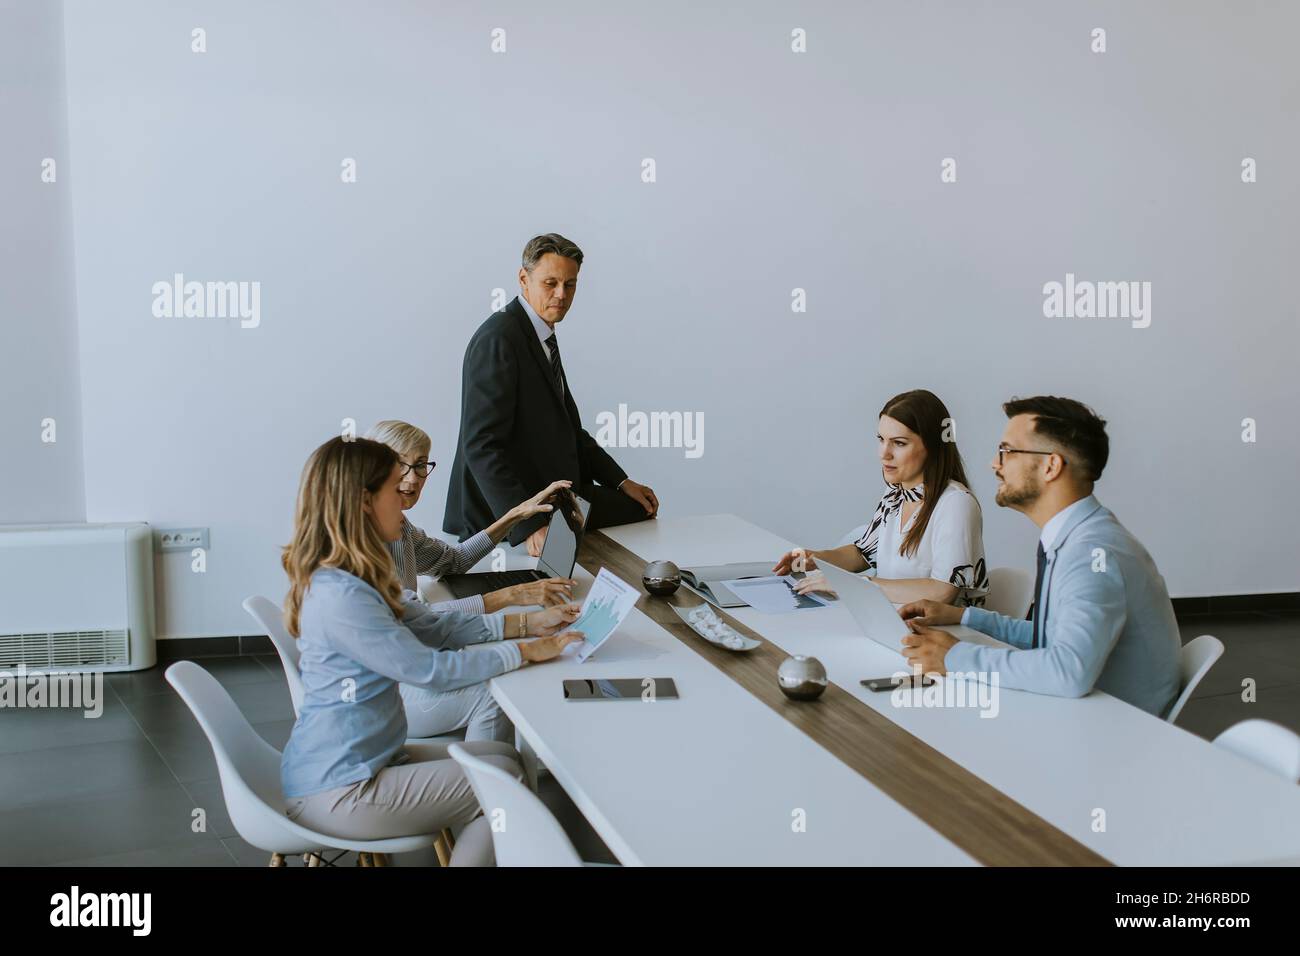 View at group of business people working together and preparing new project on a meeting in the office Stock Photo